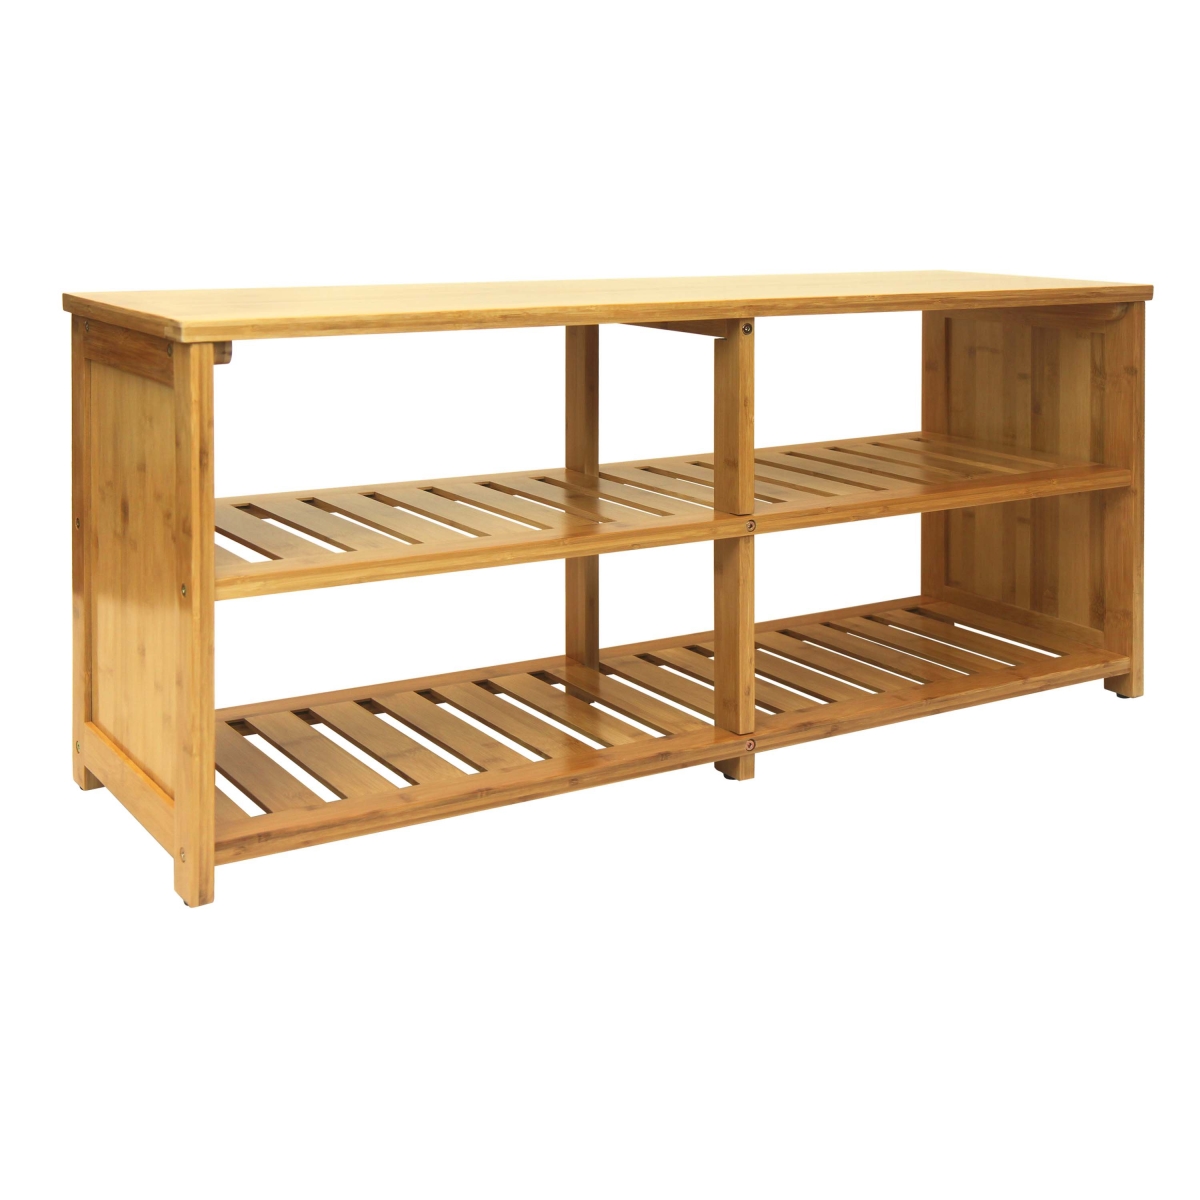 Bsb1774 Bamboo Entryway Storage Bench, Natural - 10 Pair - 42 X 13 X 18.75 In.